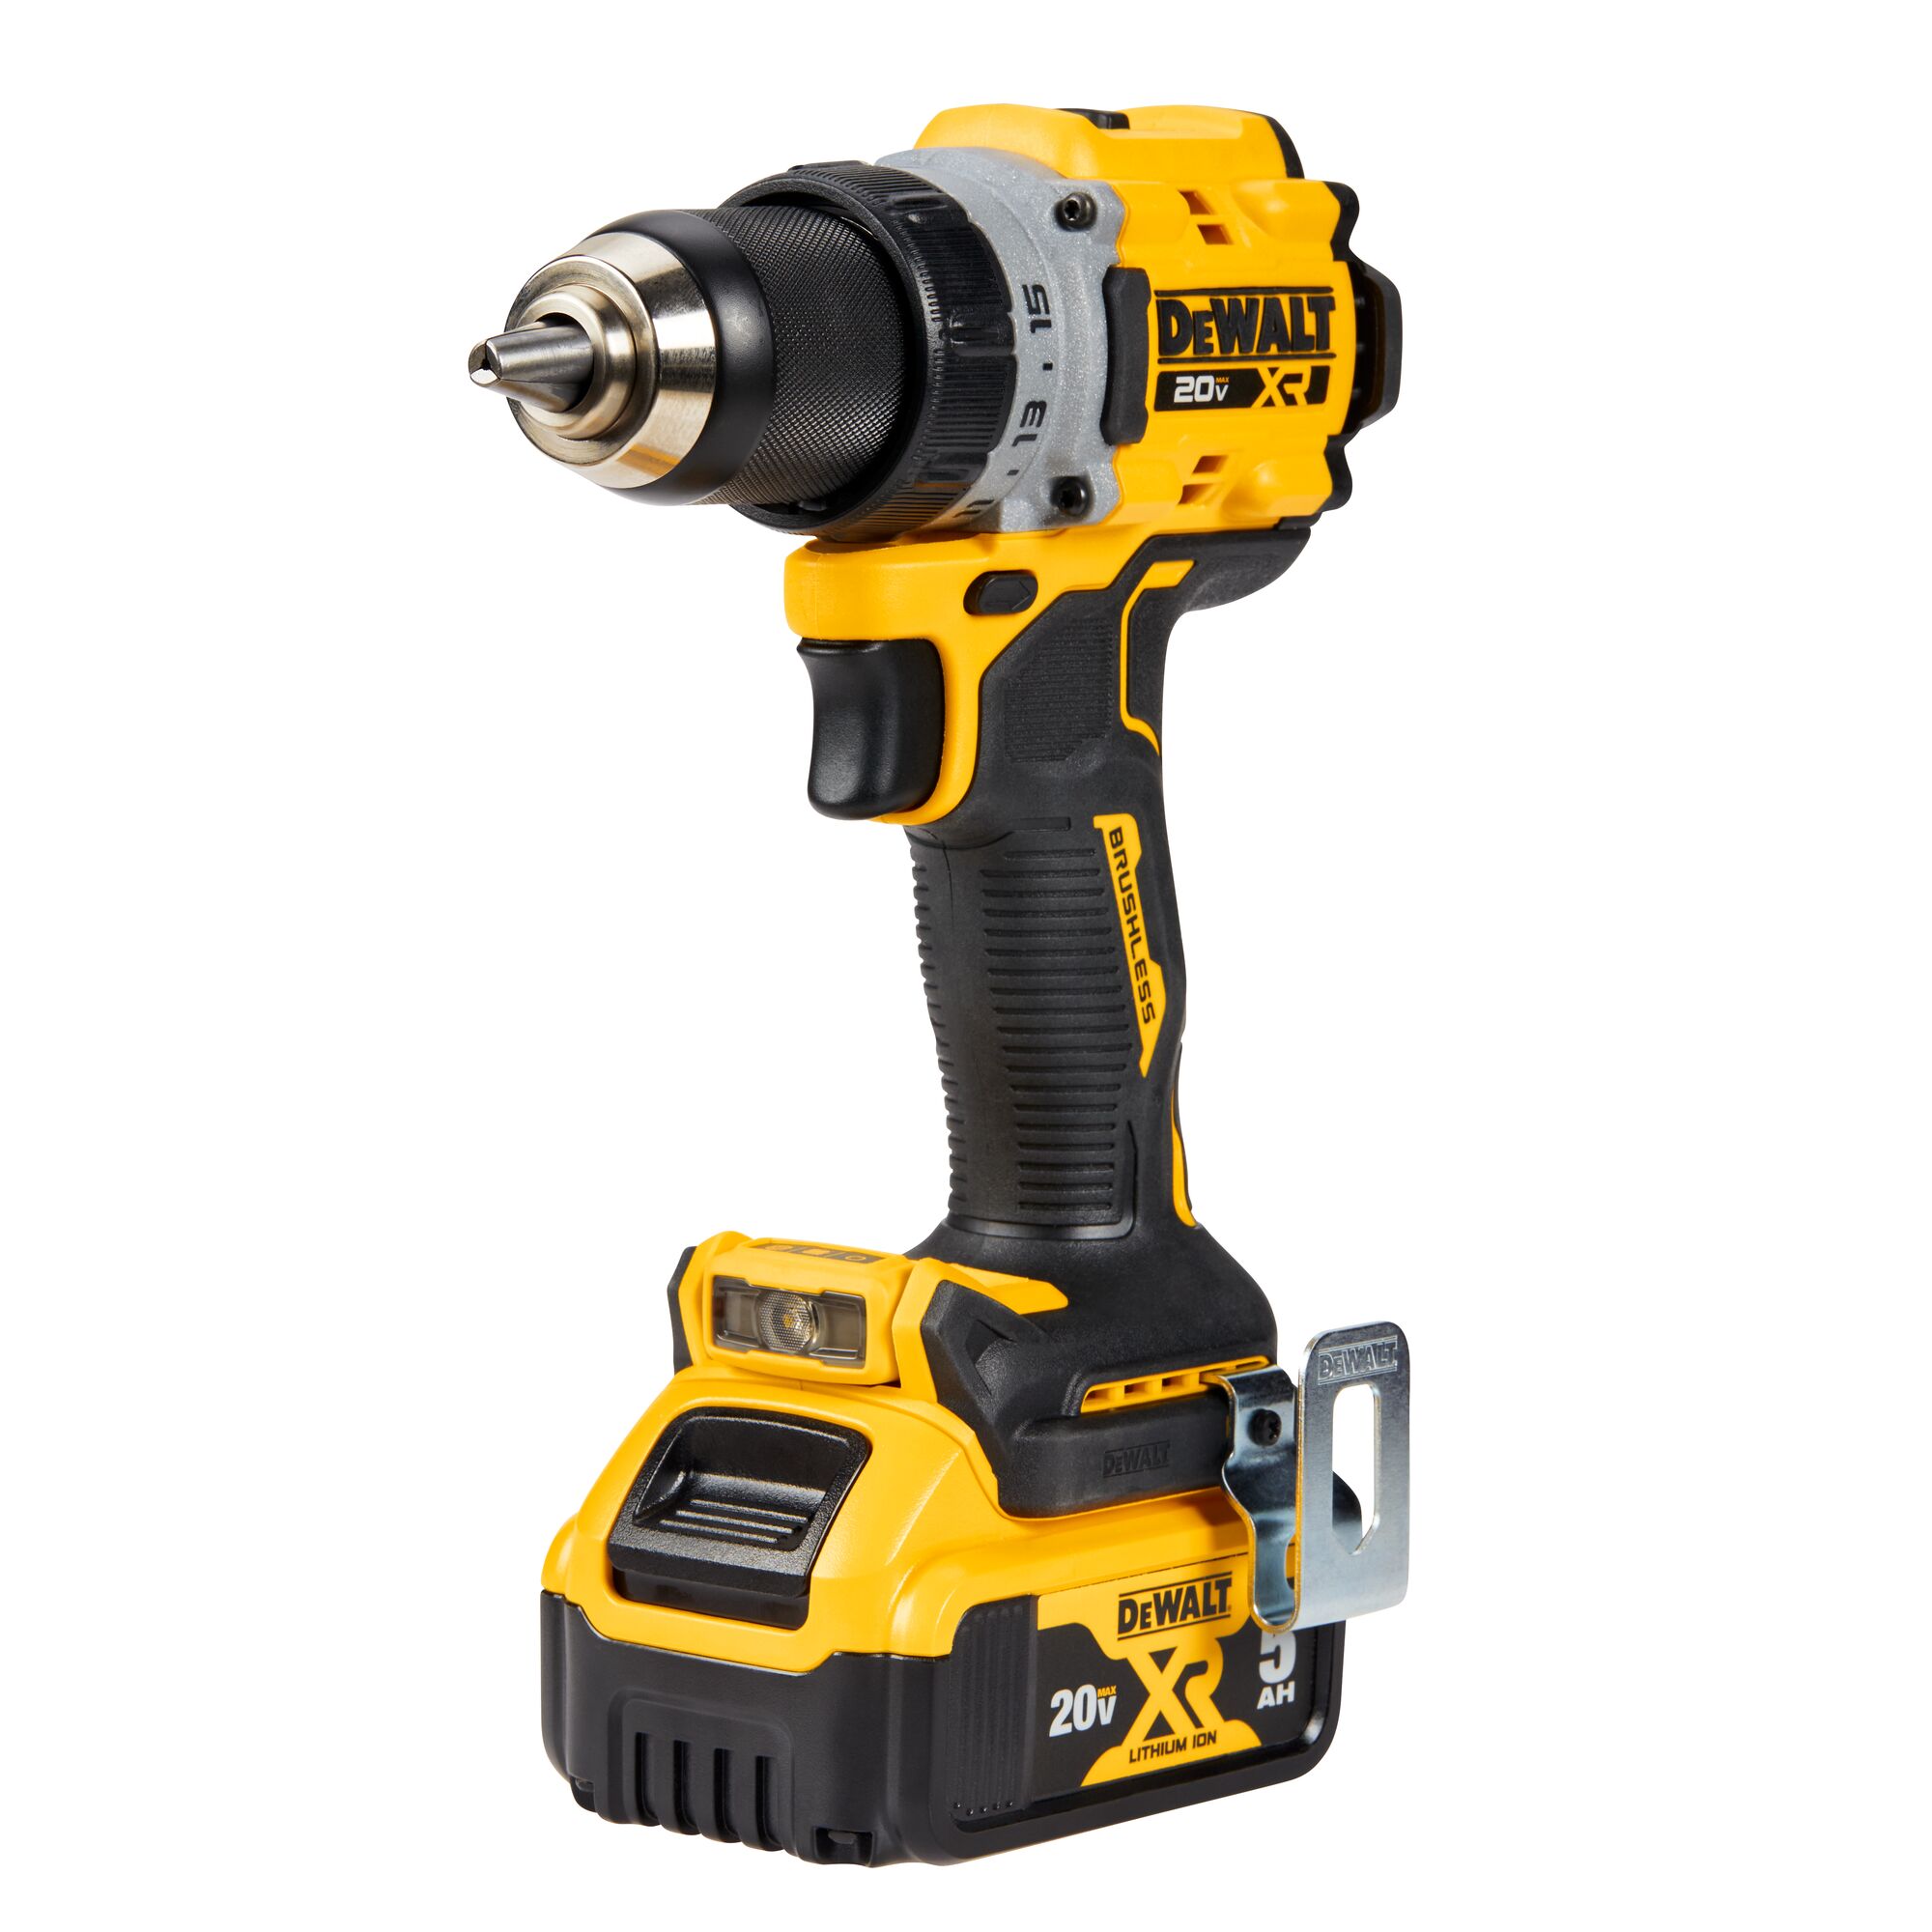 Black And Decker VS. DeWalt Cordless Drill Driver [Things to Know